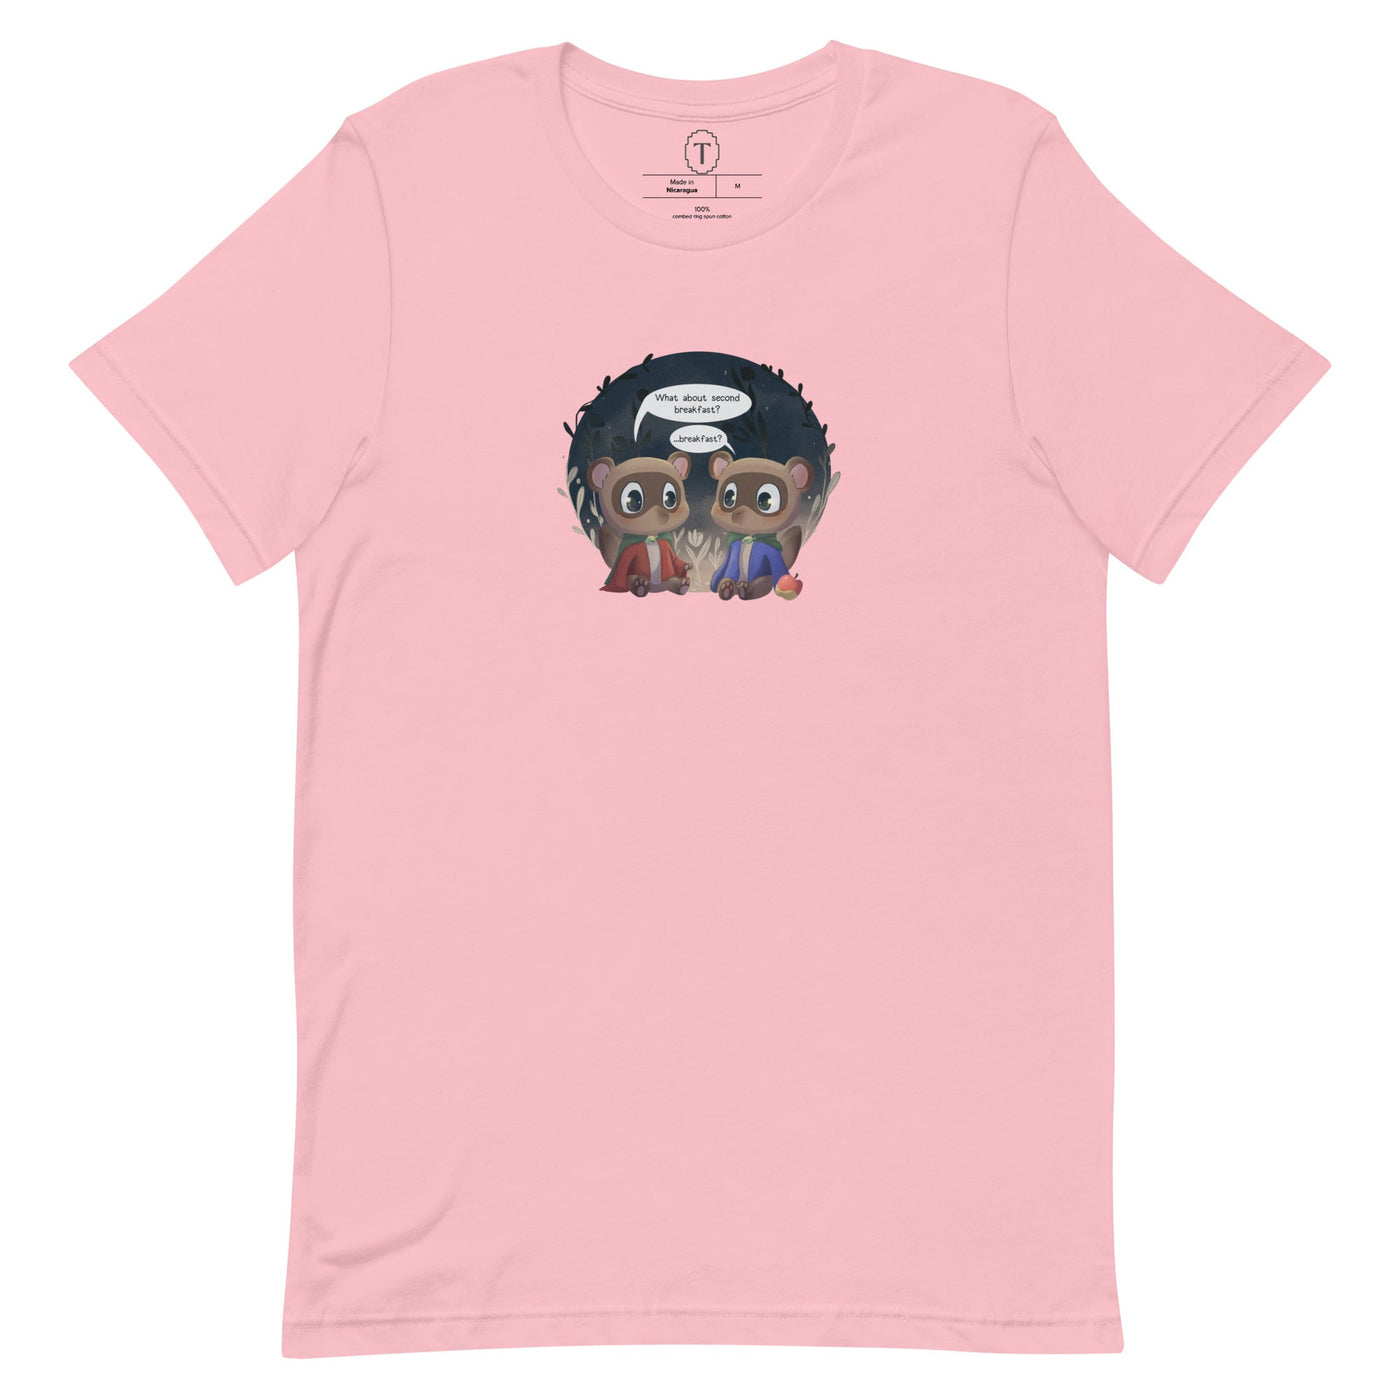 Nooklings Breakfast | Short-Sleeve Unisex T-Shirt | Animal Crossing Threads and Thistles Inventory Pink S 